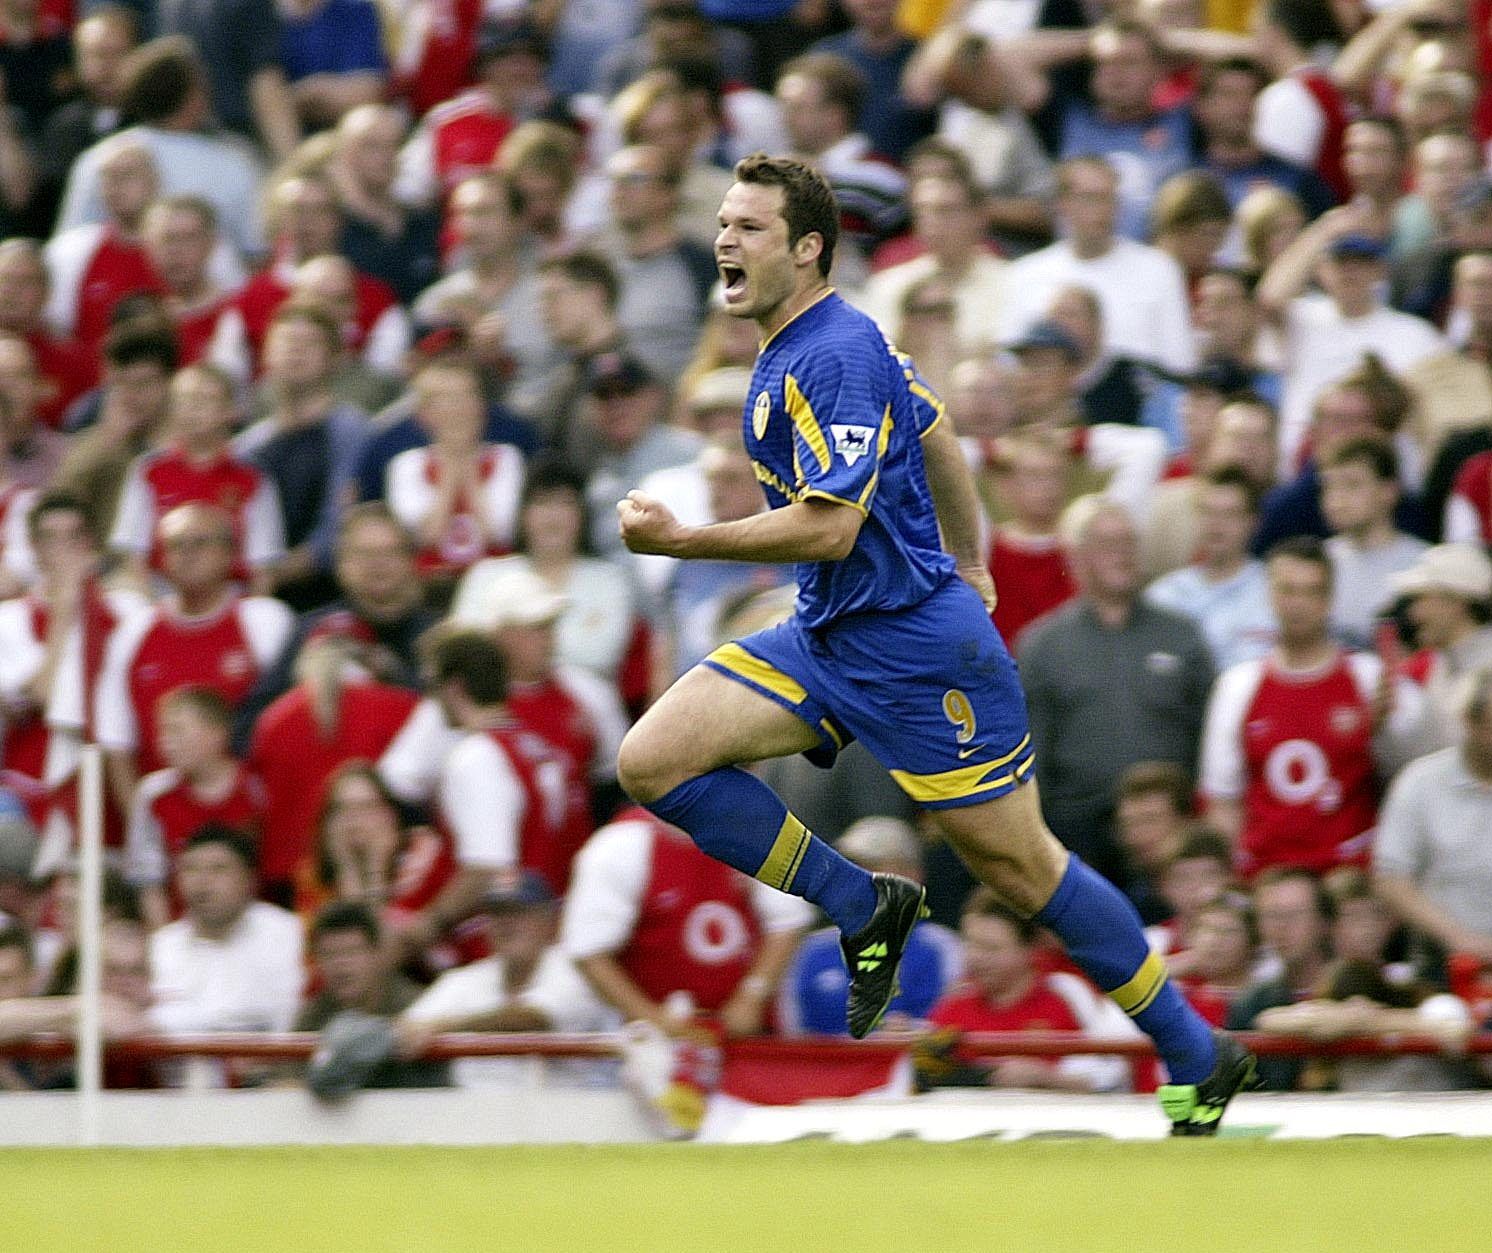 Football - FA Barclaycard Premiershp - Arsenal v Leeds United - 4/5/03  
Mark Viduka celebrates scoring the winning goal for Leeds which kept Leeds in the premiership and ended Arsenal's Title dreams  
Mandatory Credit: Action Images / Alex Morton 
Livepic